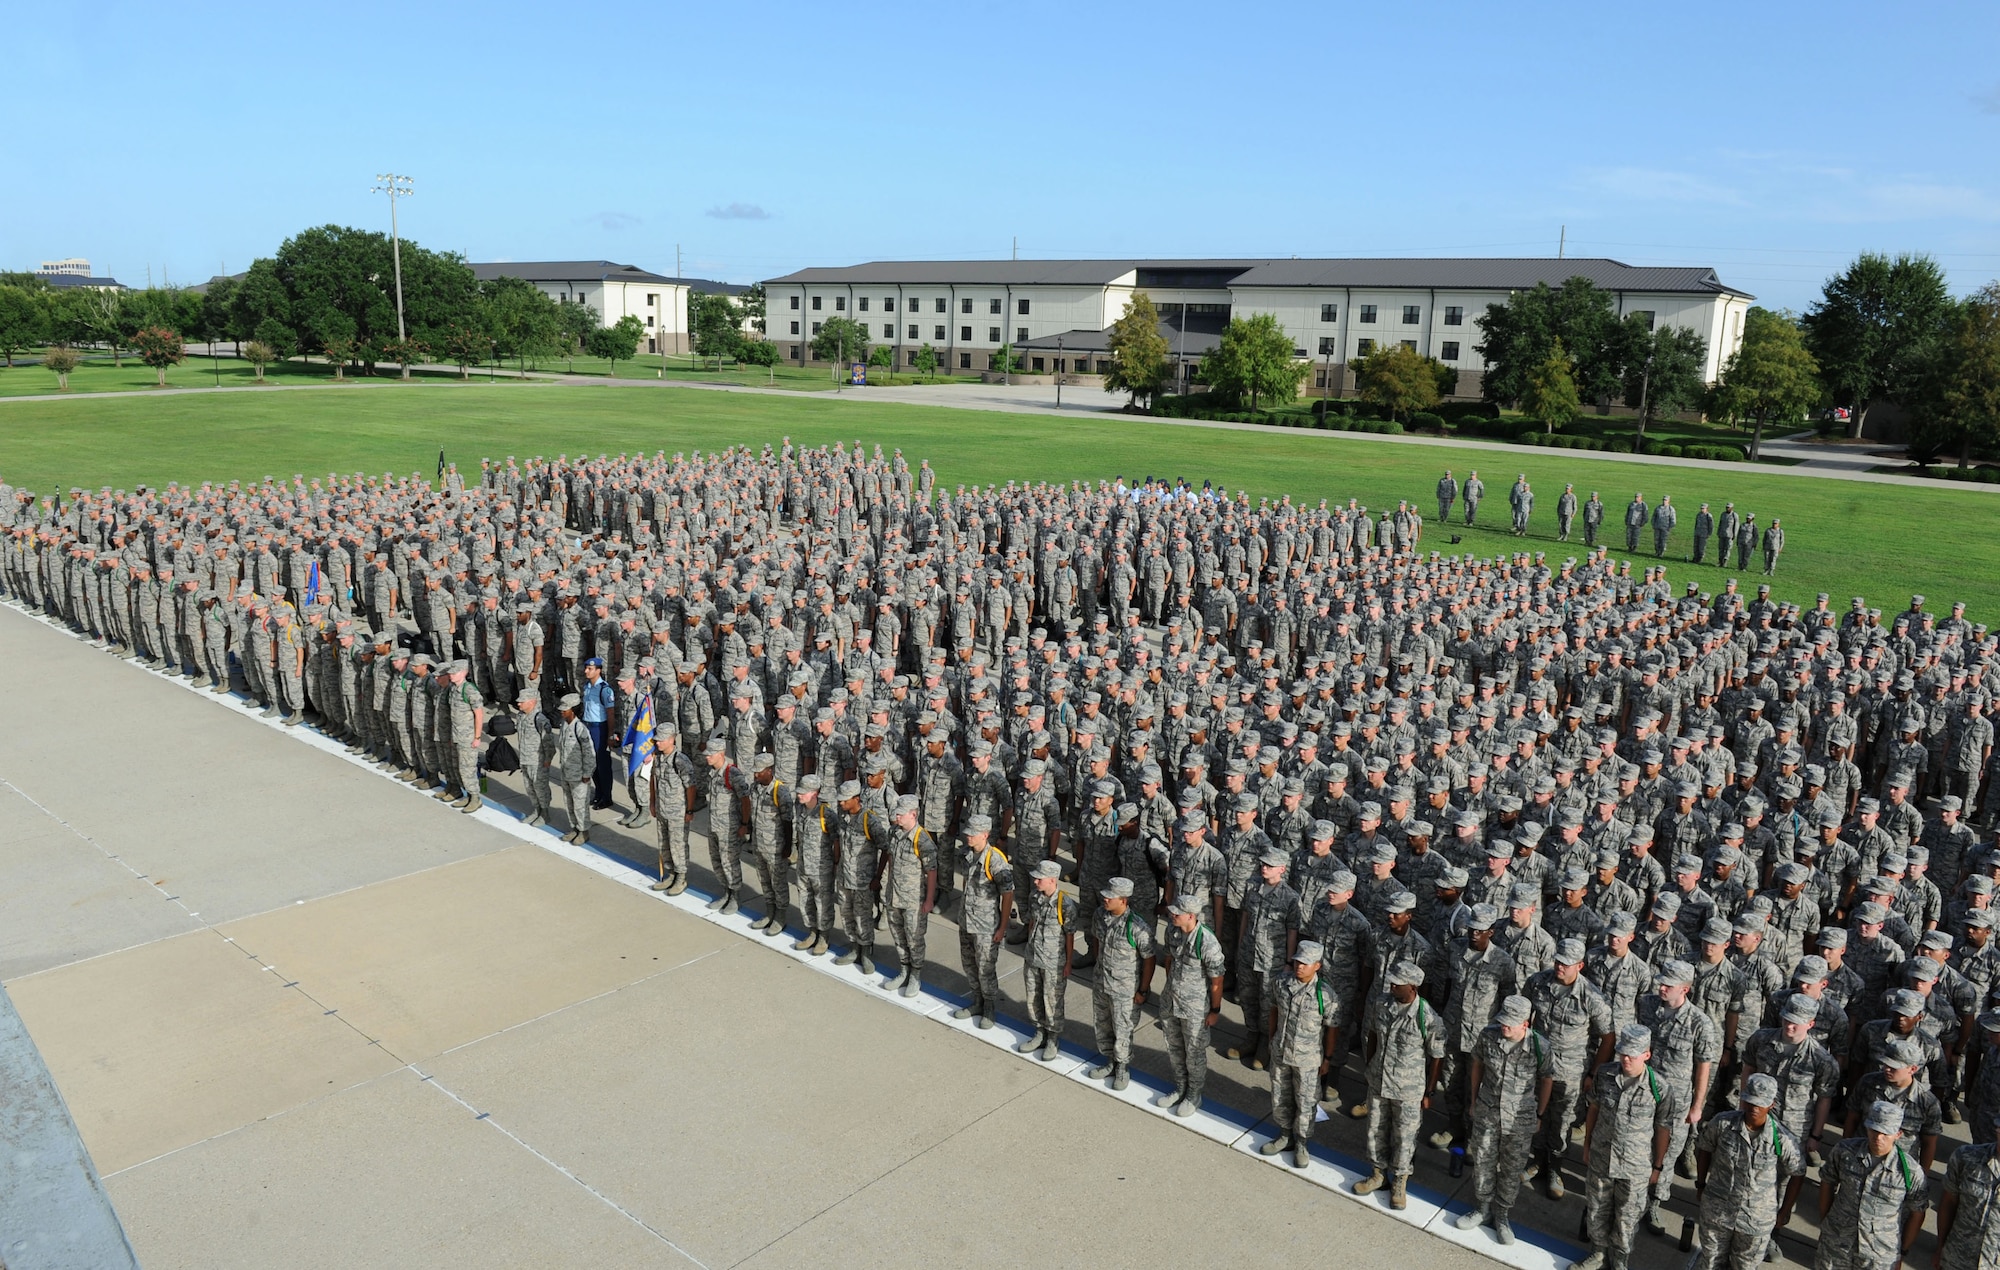 Airmen from the 81st Training Group stand in formation during the 81st TRG Dragon Recognition Ceremony on the drill pad at the Levitow Training Support Facility July 28, 2016, on Keesler Air Force Base, Miss. The monthly event recognized the Airman of the Month for June, the 2016 second quarter Military Training Flight of the Month and Military Training Leader Dragon Award winner as well as Airmen promotees. (U.S. Air Force photo by Kemberly Groue/Released)